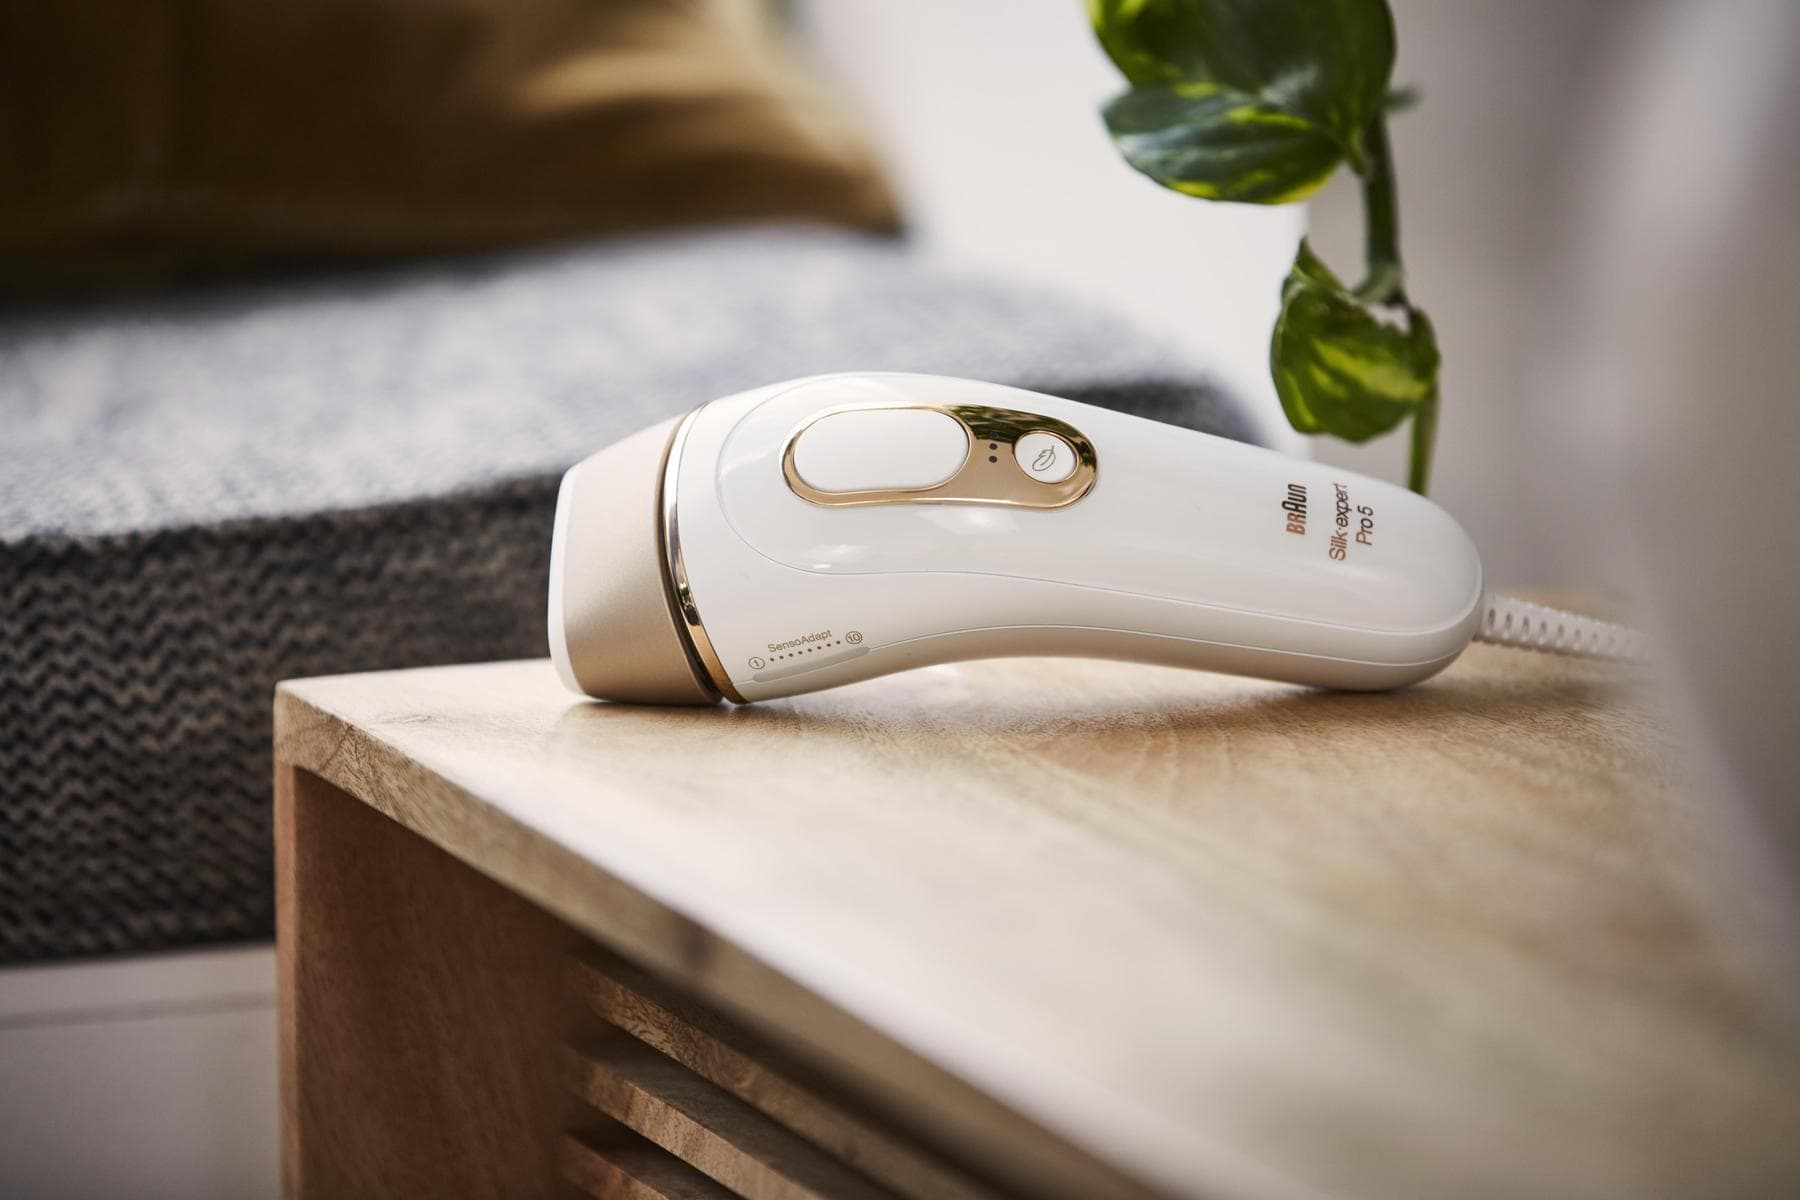 At-Home Laser Hair Removal - Your No. 1 Beauty Purchase